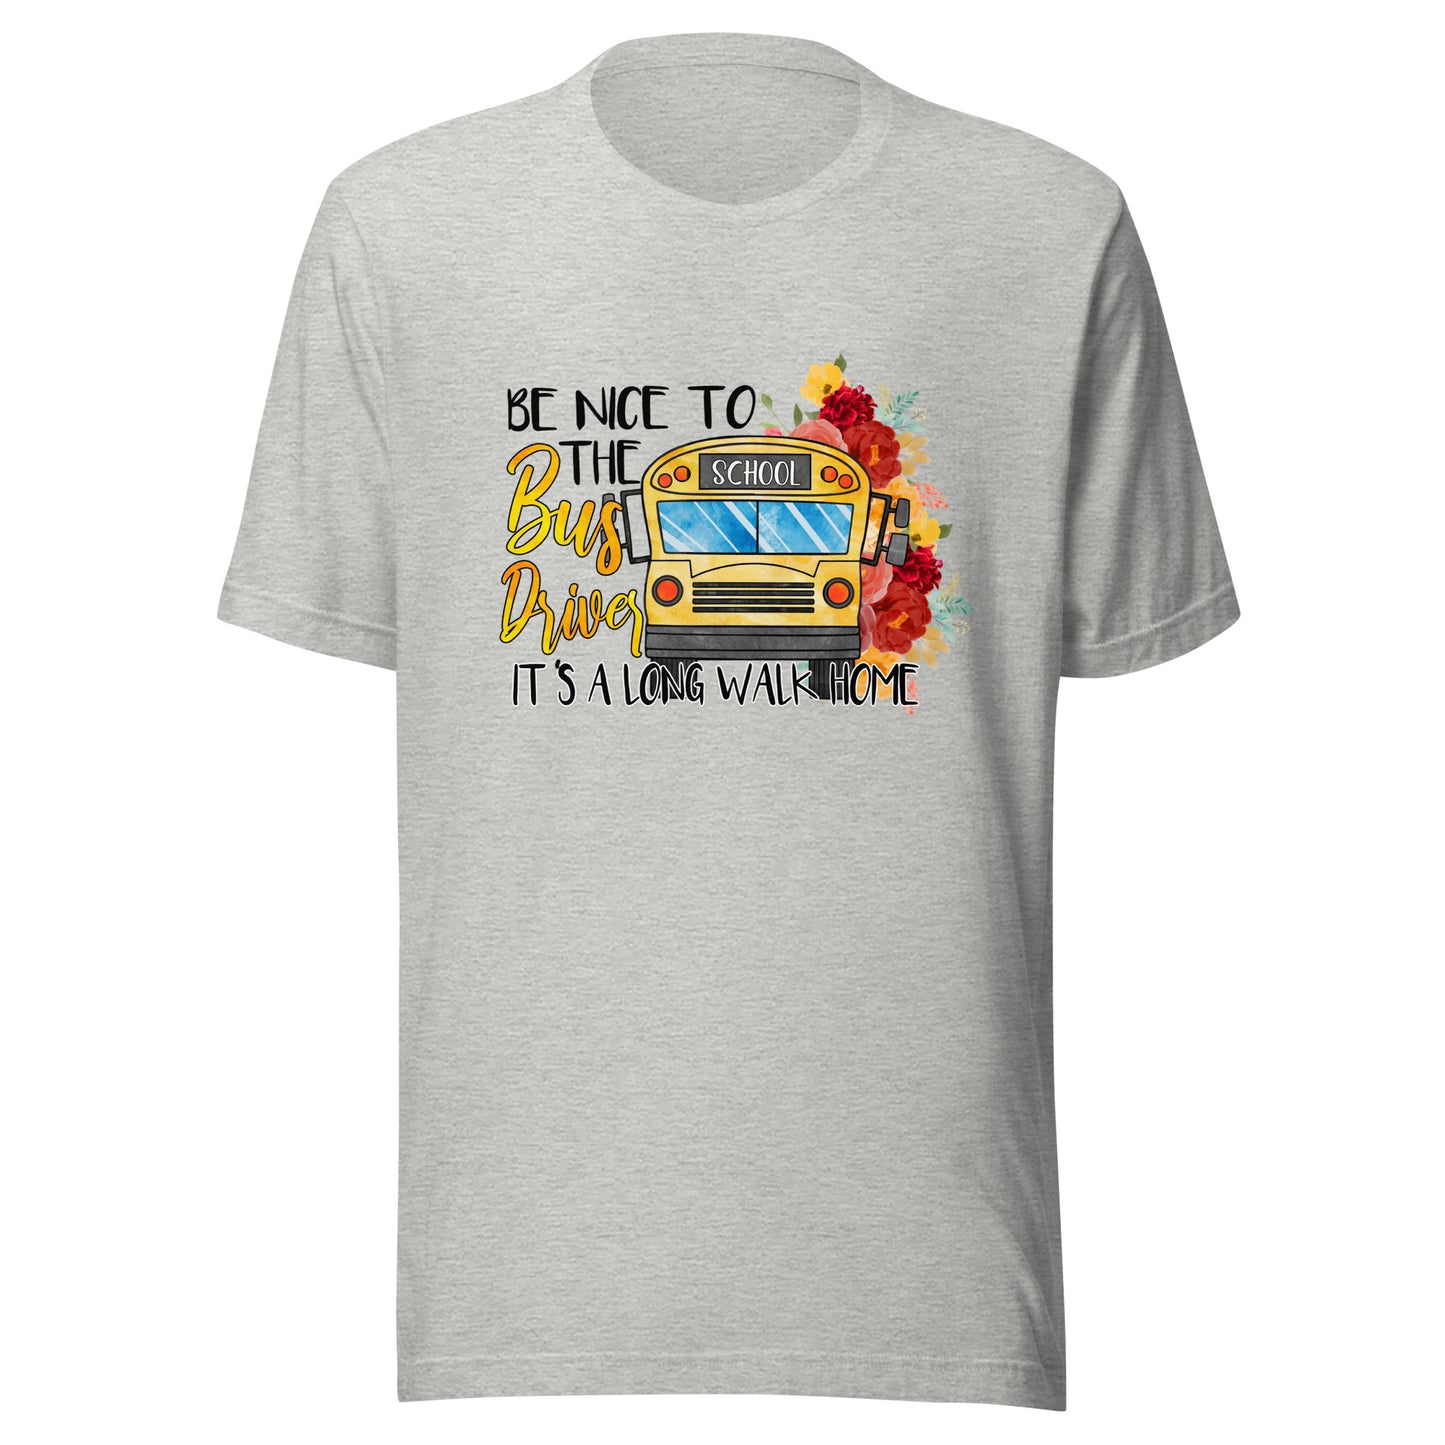 "Be Nice to the Bus Driver" T-shirt